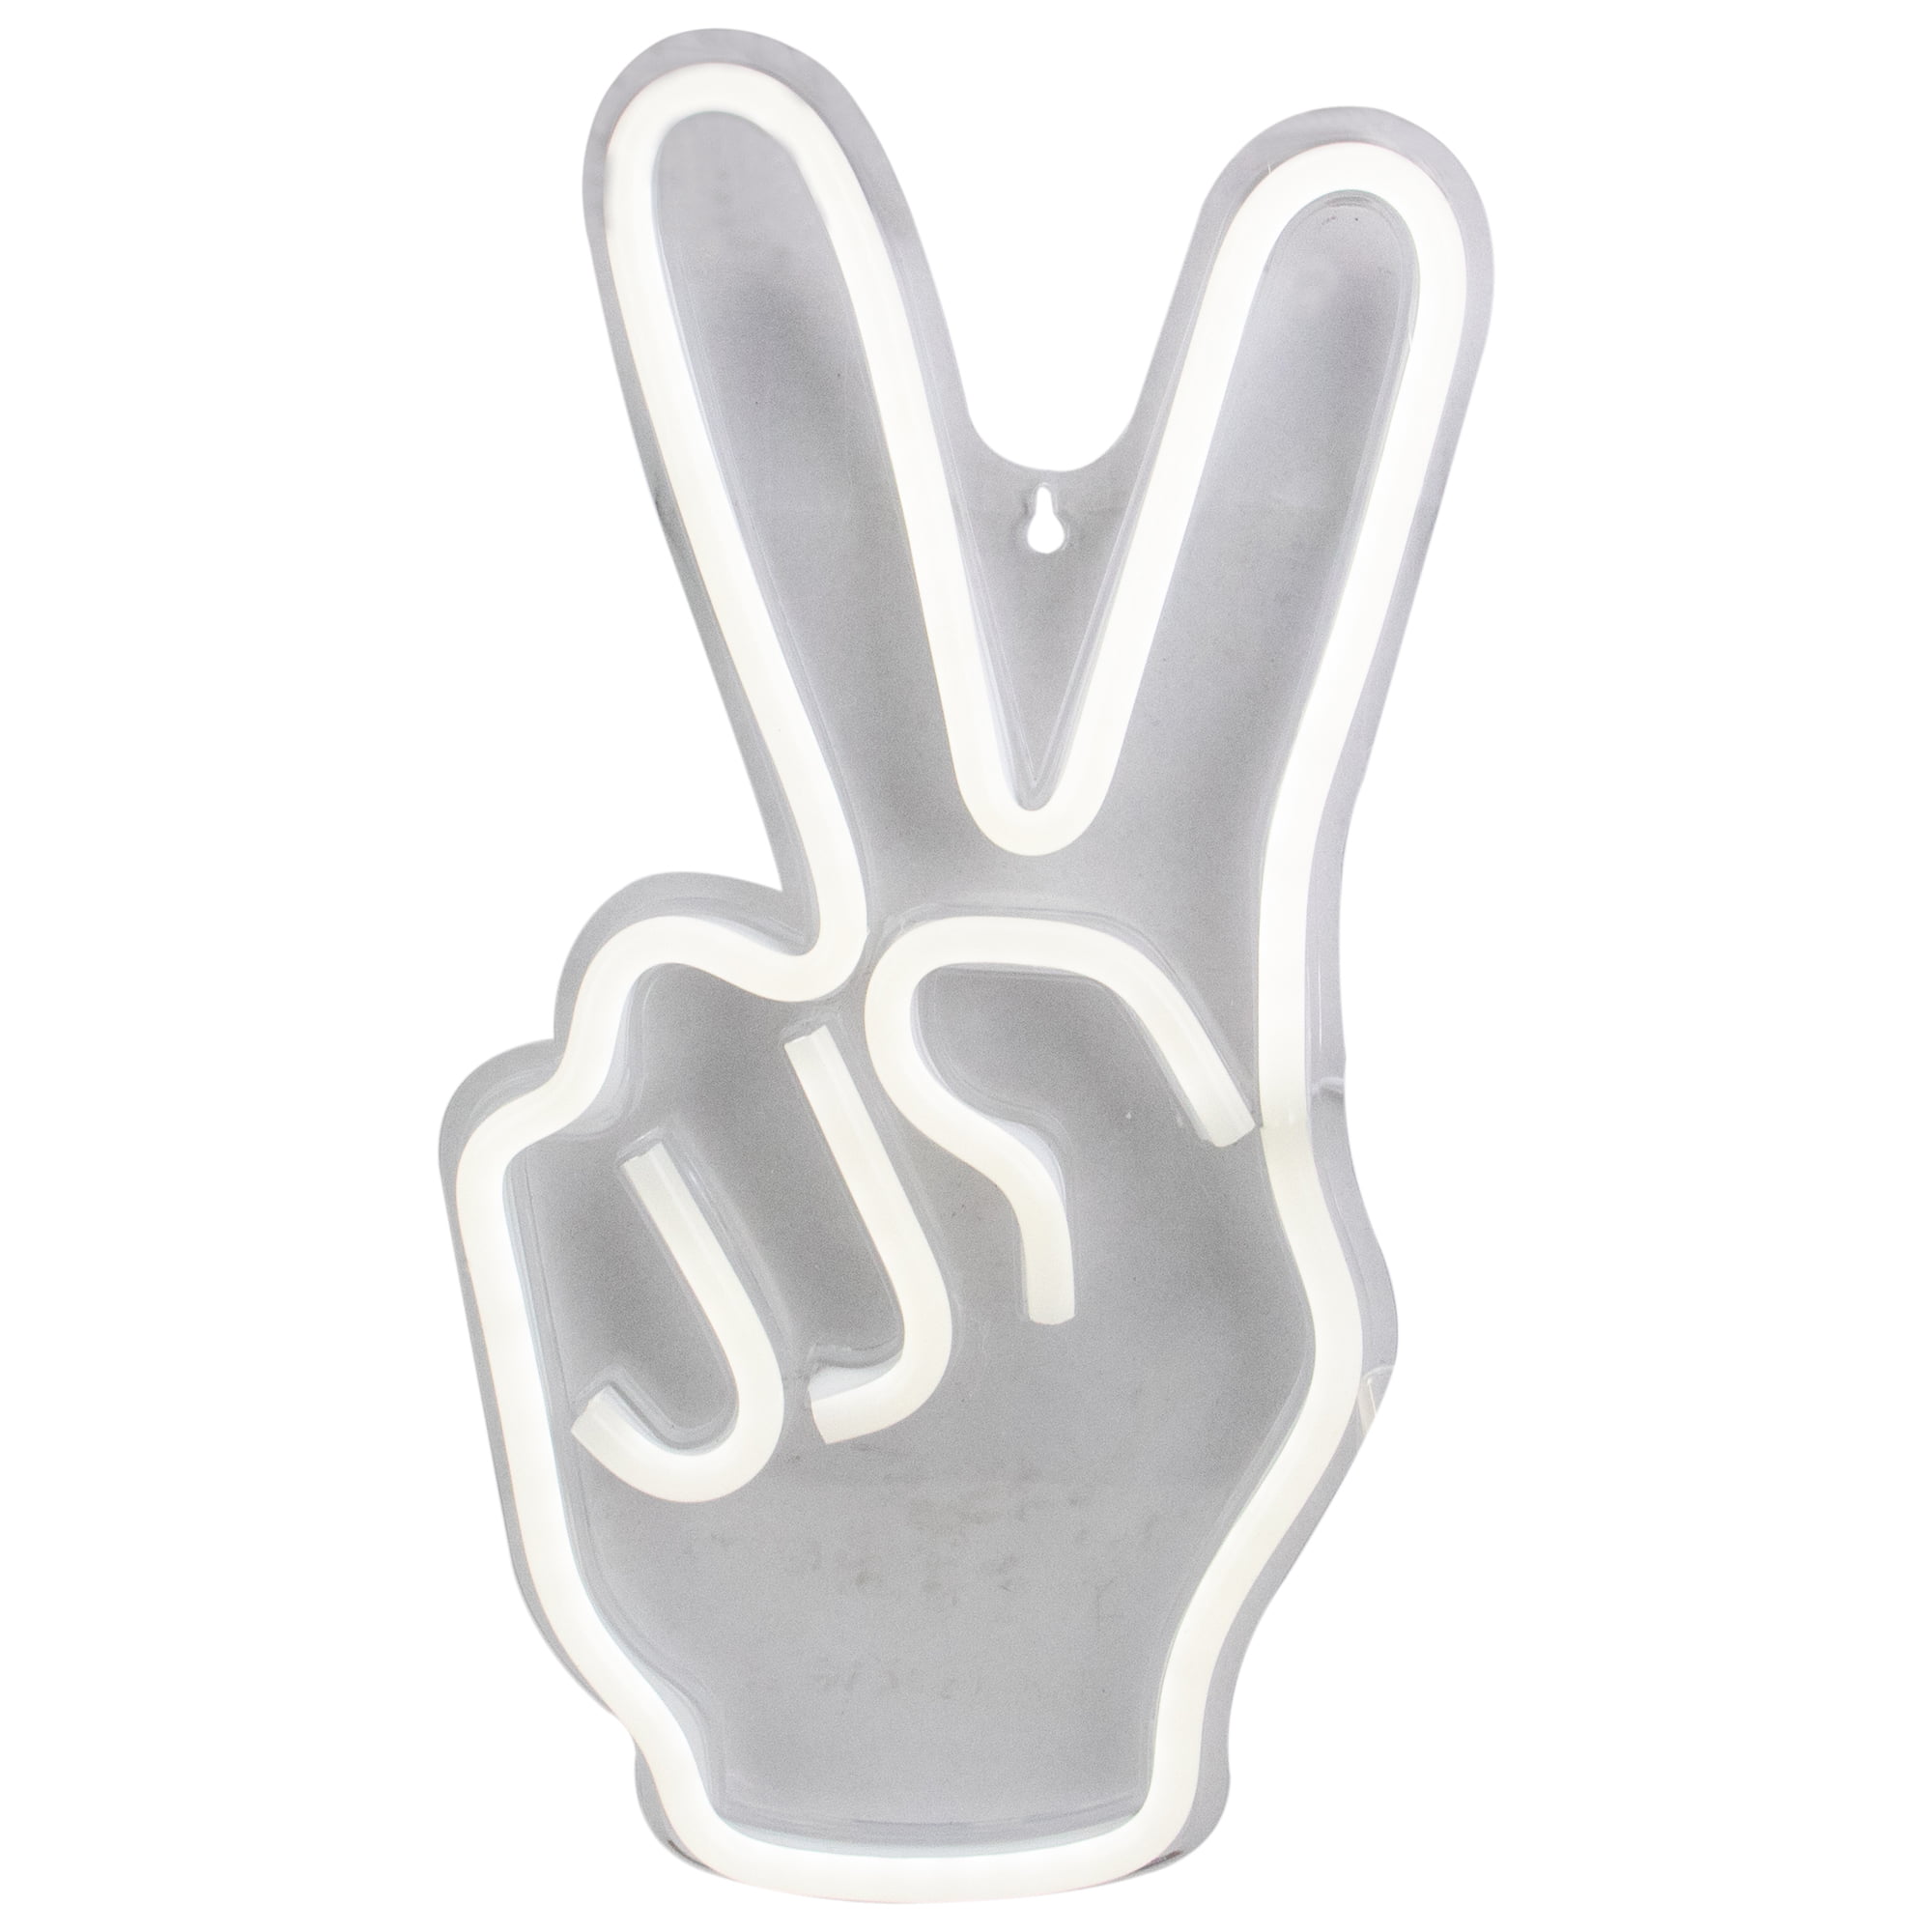 Bright White Neon Style Peace Fingers, Neon Peace Sign Lamp